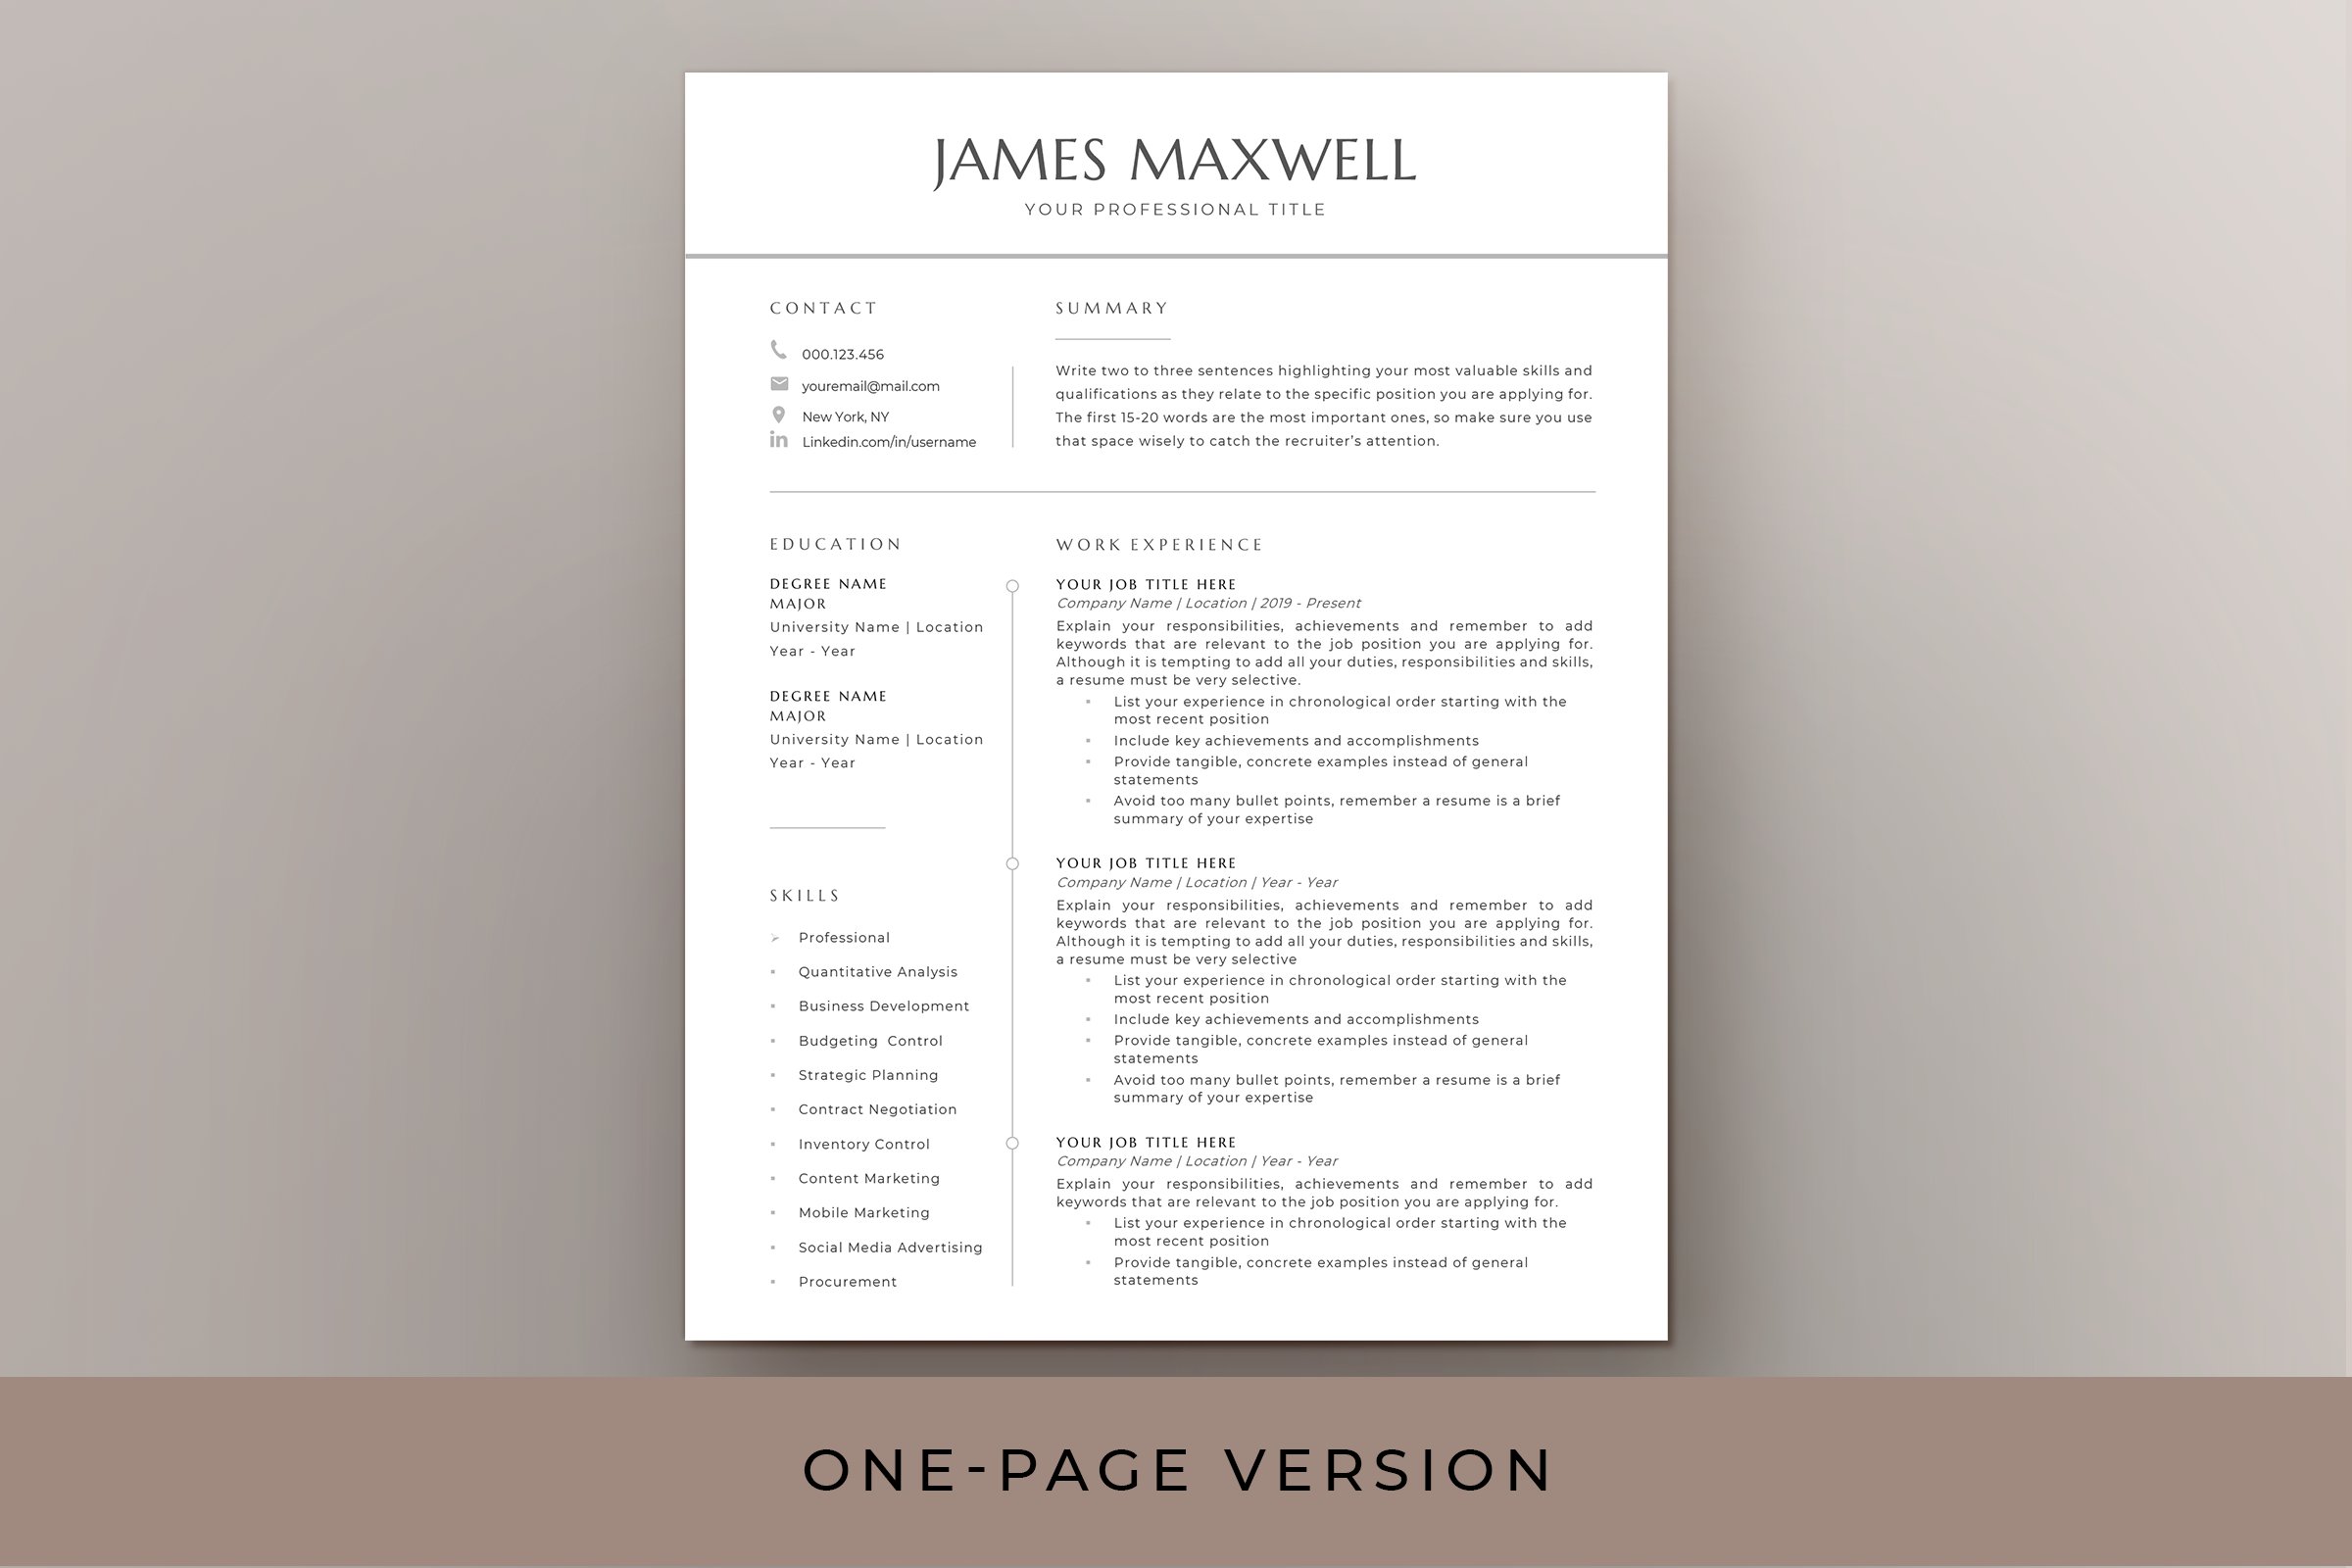 Executive Resume & Cover Letter Word preview image.